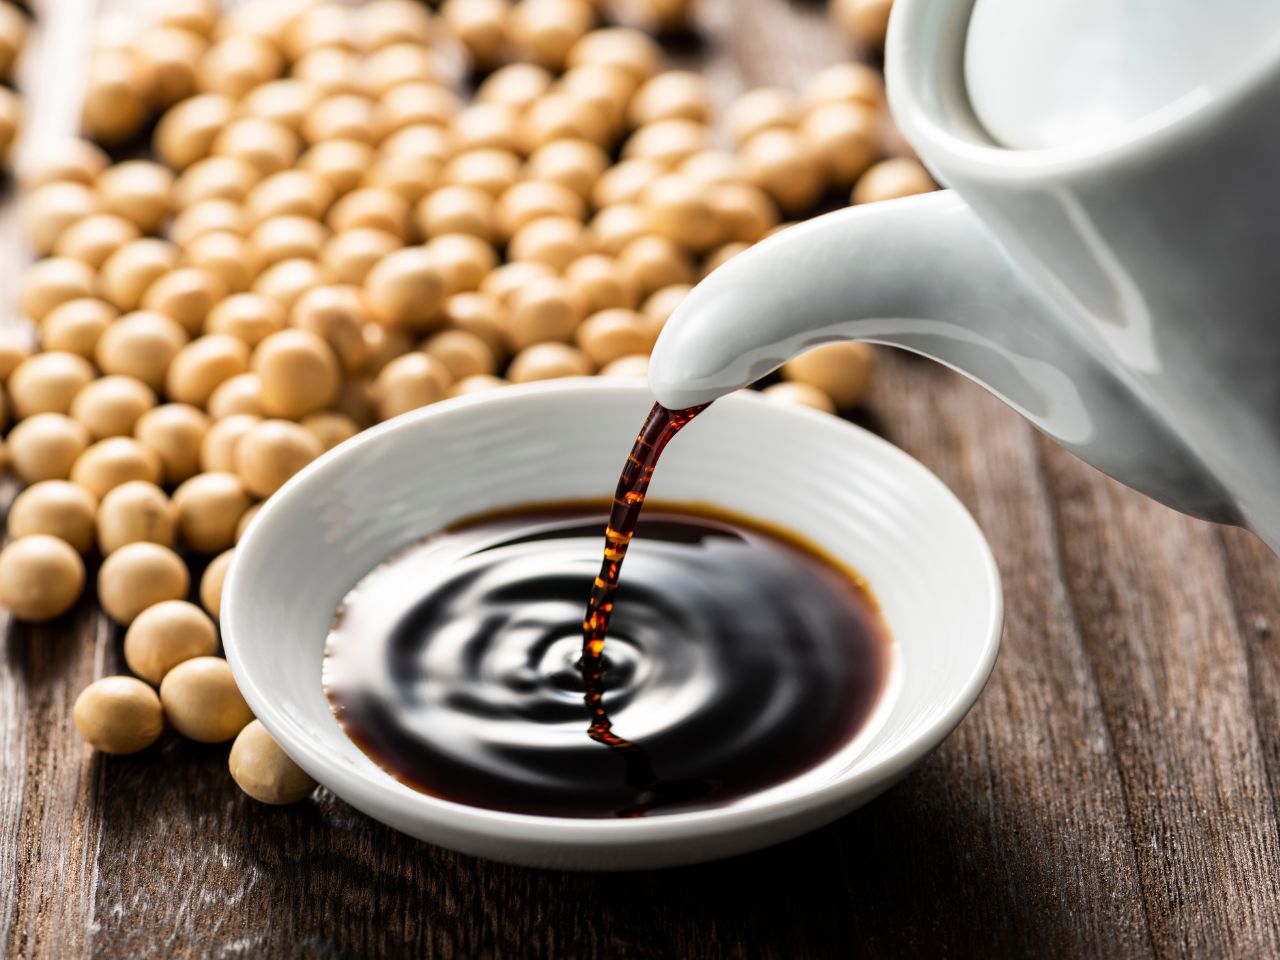 Should Soy Sauce Be Refrigerated?